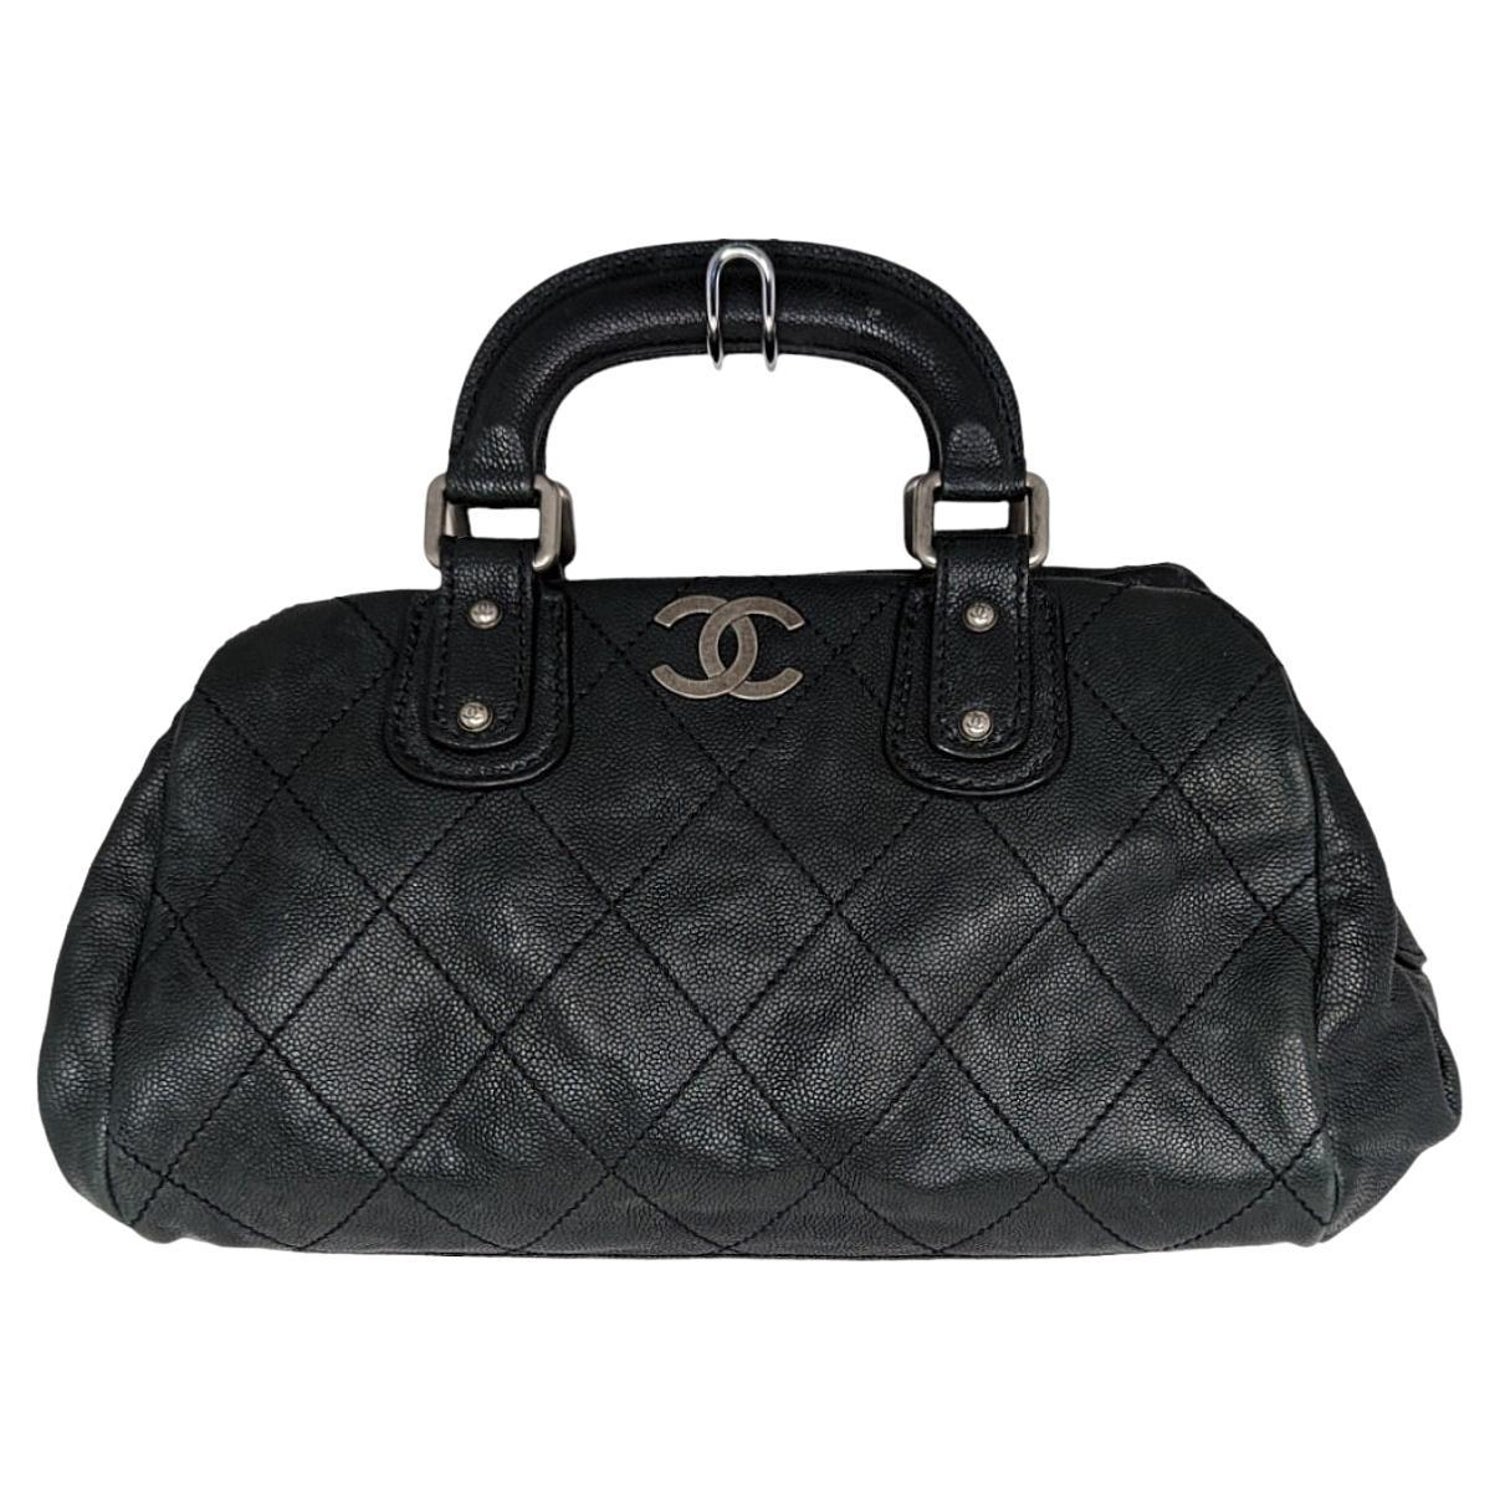 Chanel Black/Ivory Quilted Calfskin Leather Featherweight Mini Bowling Bag  - Yoogi's Closet